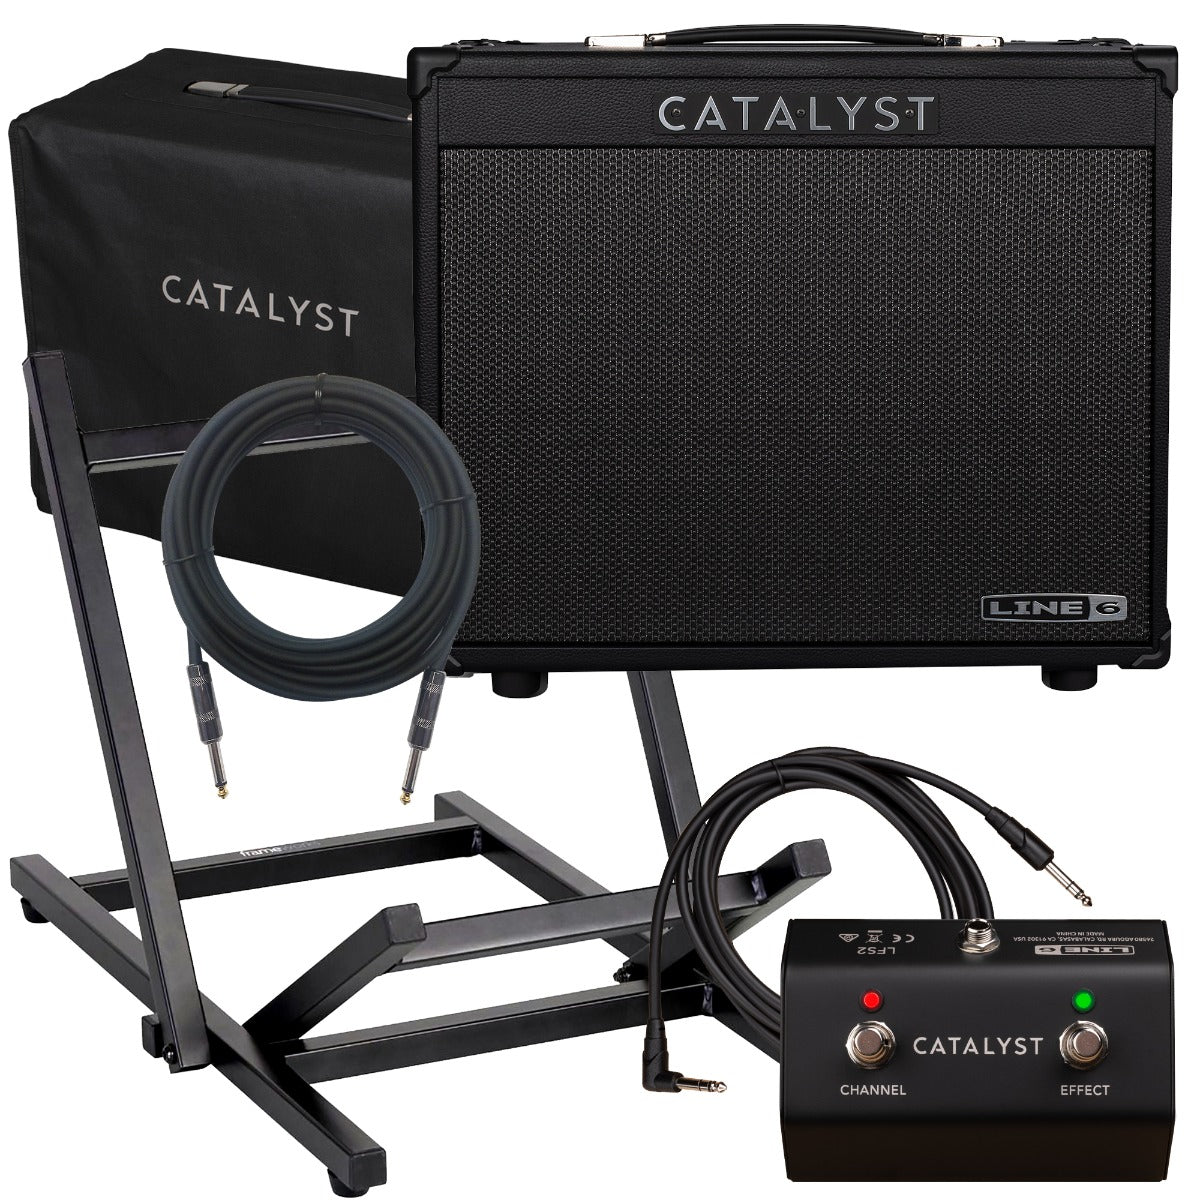 Collage of the Line 6 Catalyst 60 1x12 Combo Guitar Amplifier STAGE ESSENTIALS BUNDLE showing included components